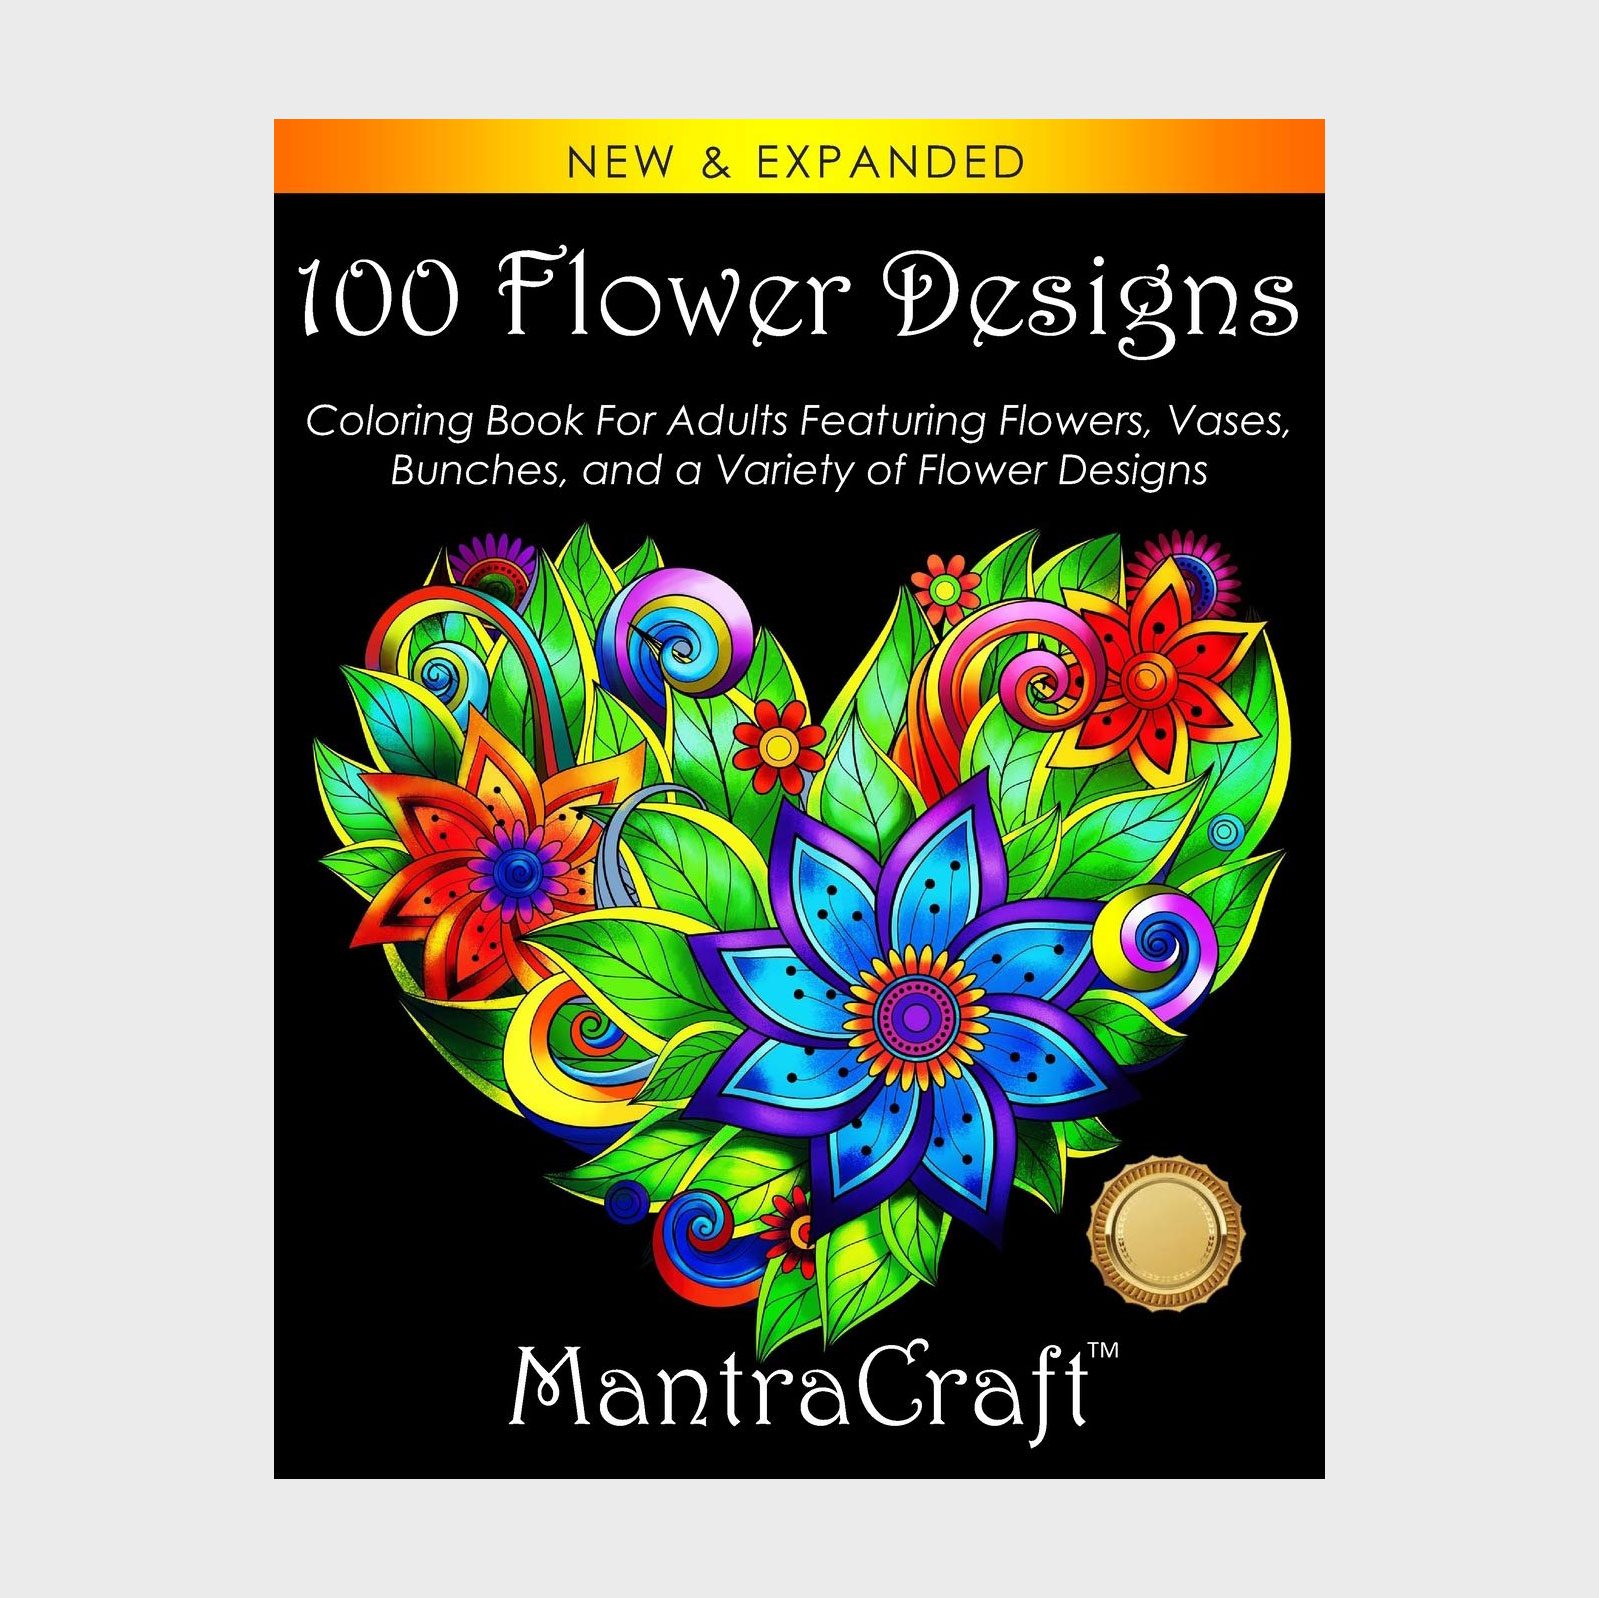 13 Best Adult Coloring Books 2020 - Cool Adult Coloring Books to Buy